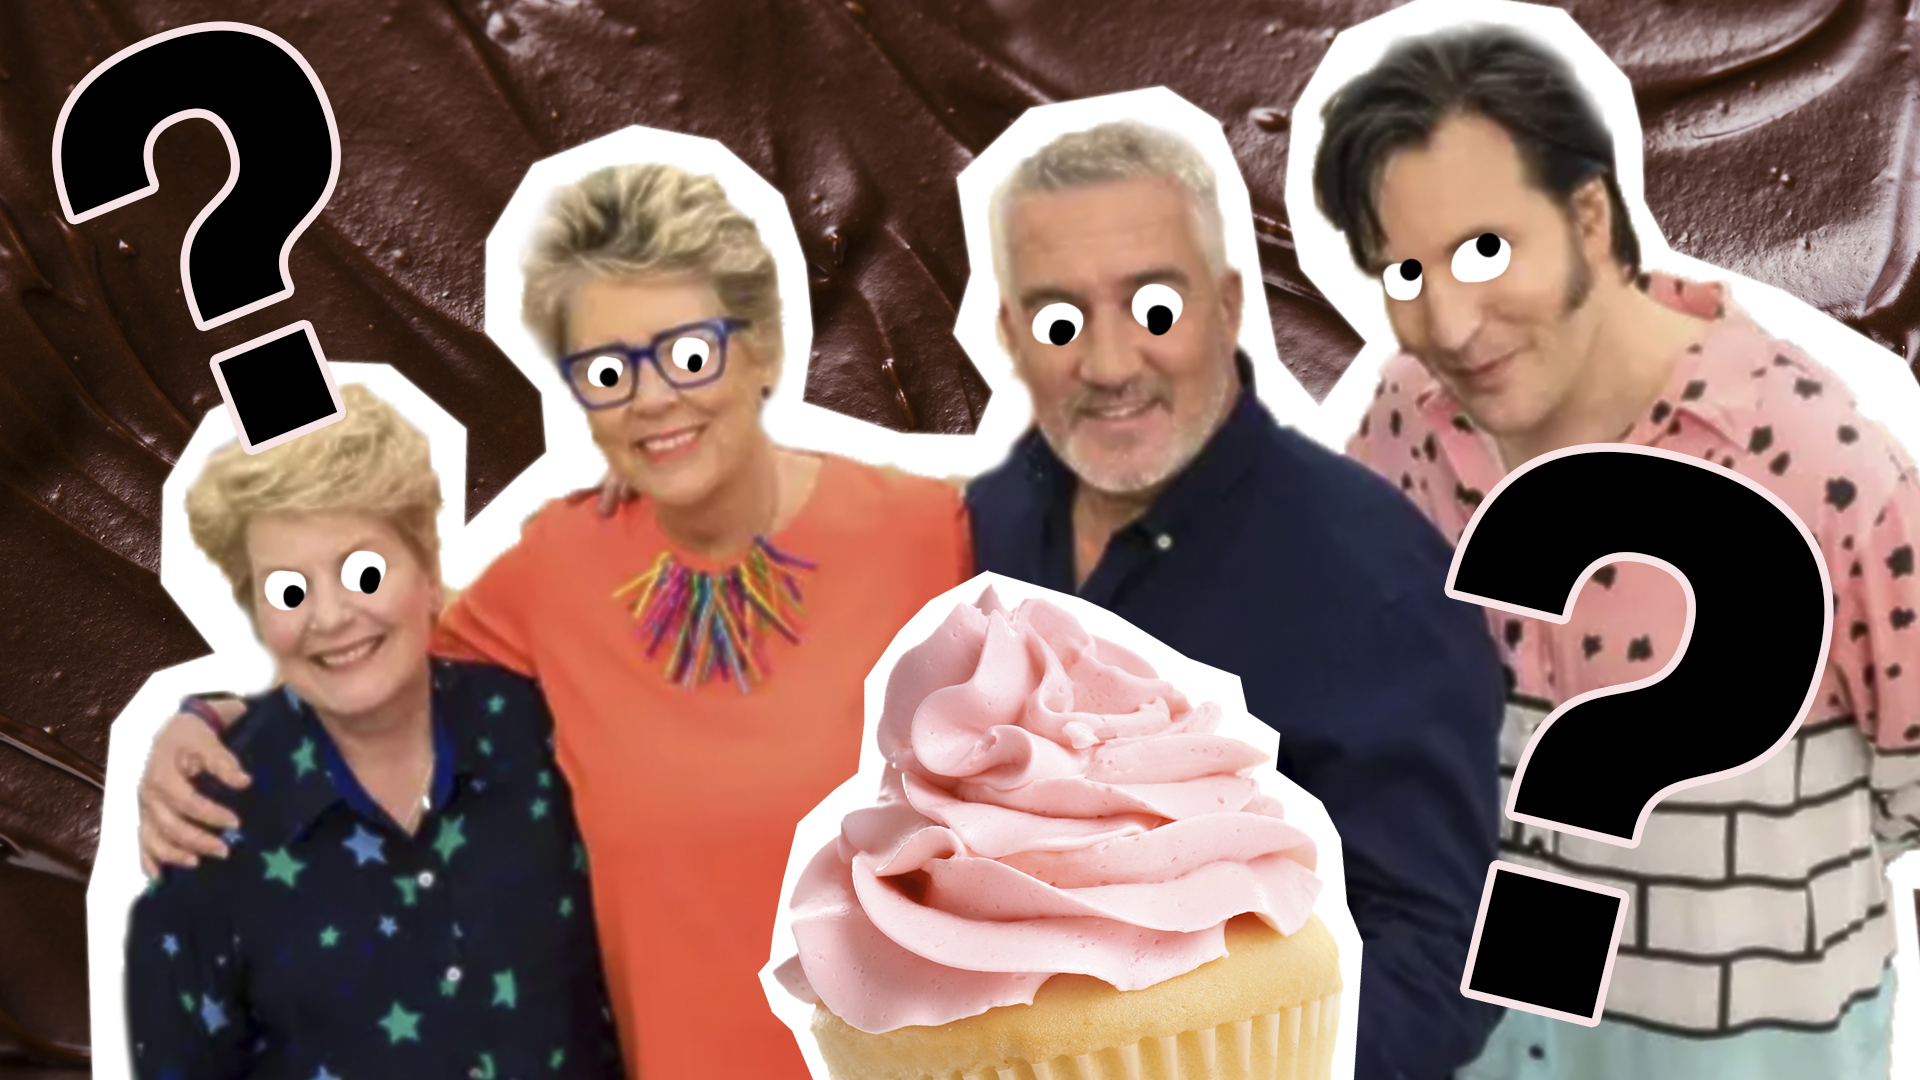 the bake off judges looking at a delicious cake